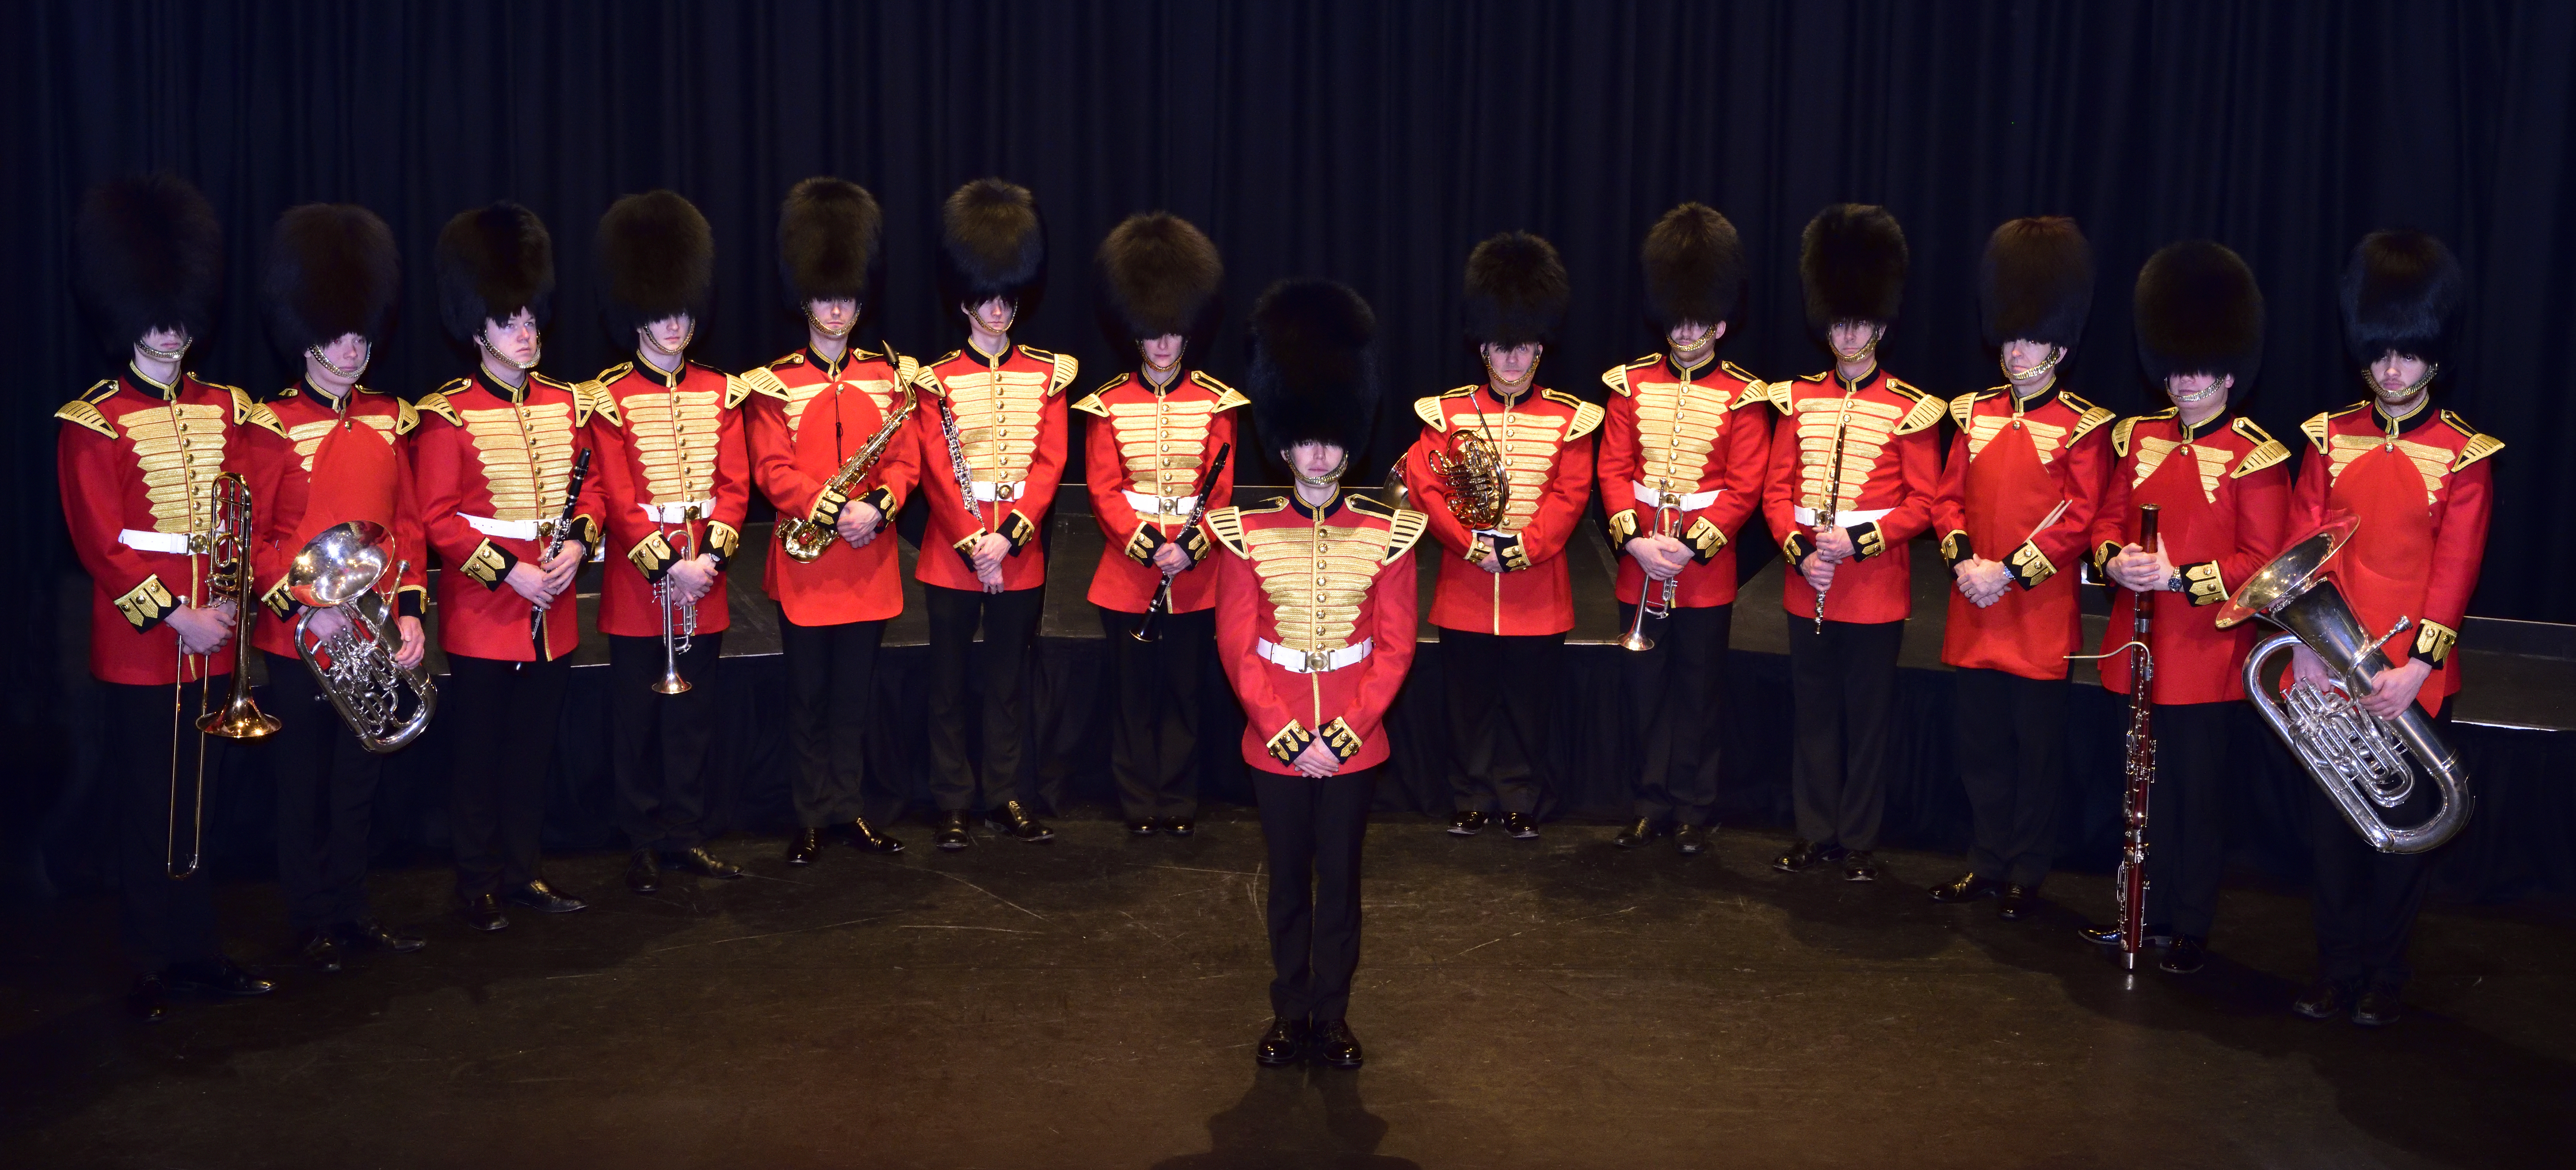 The London Military Band